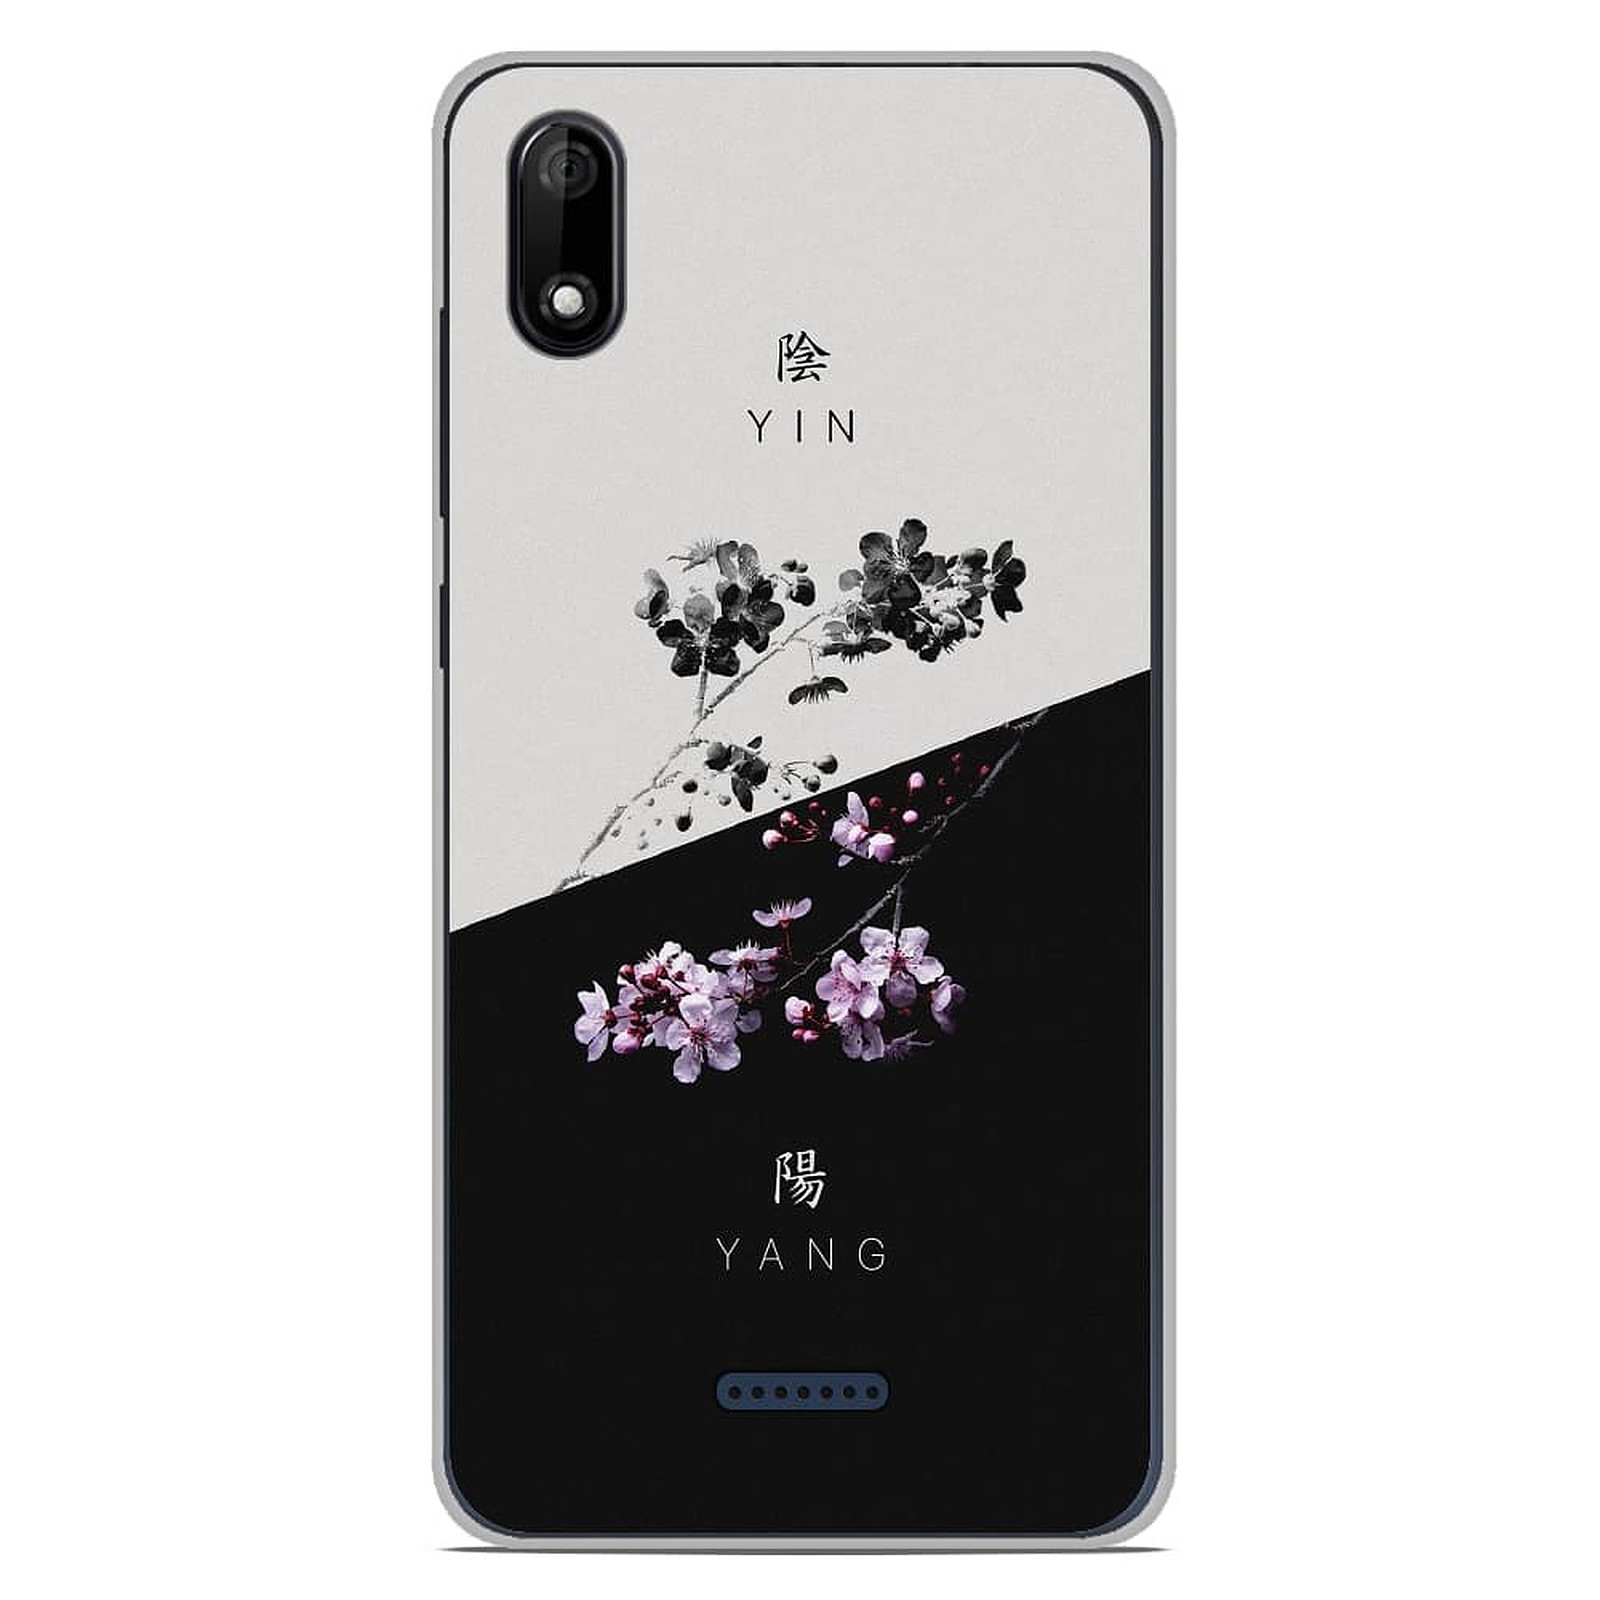 1001 Coques Coque silicone gel Wiko Y80 motif Yin et Yang - Coque telephone 1001Coques